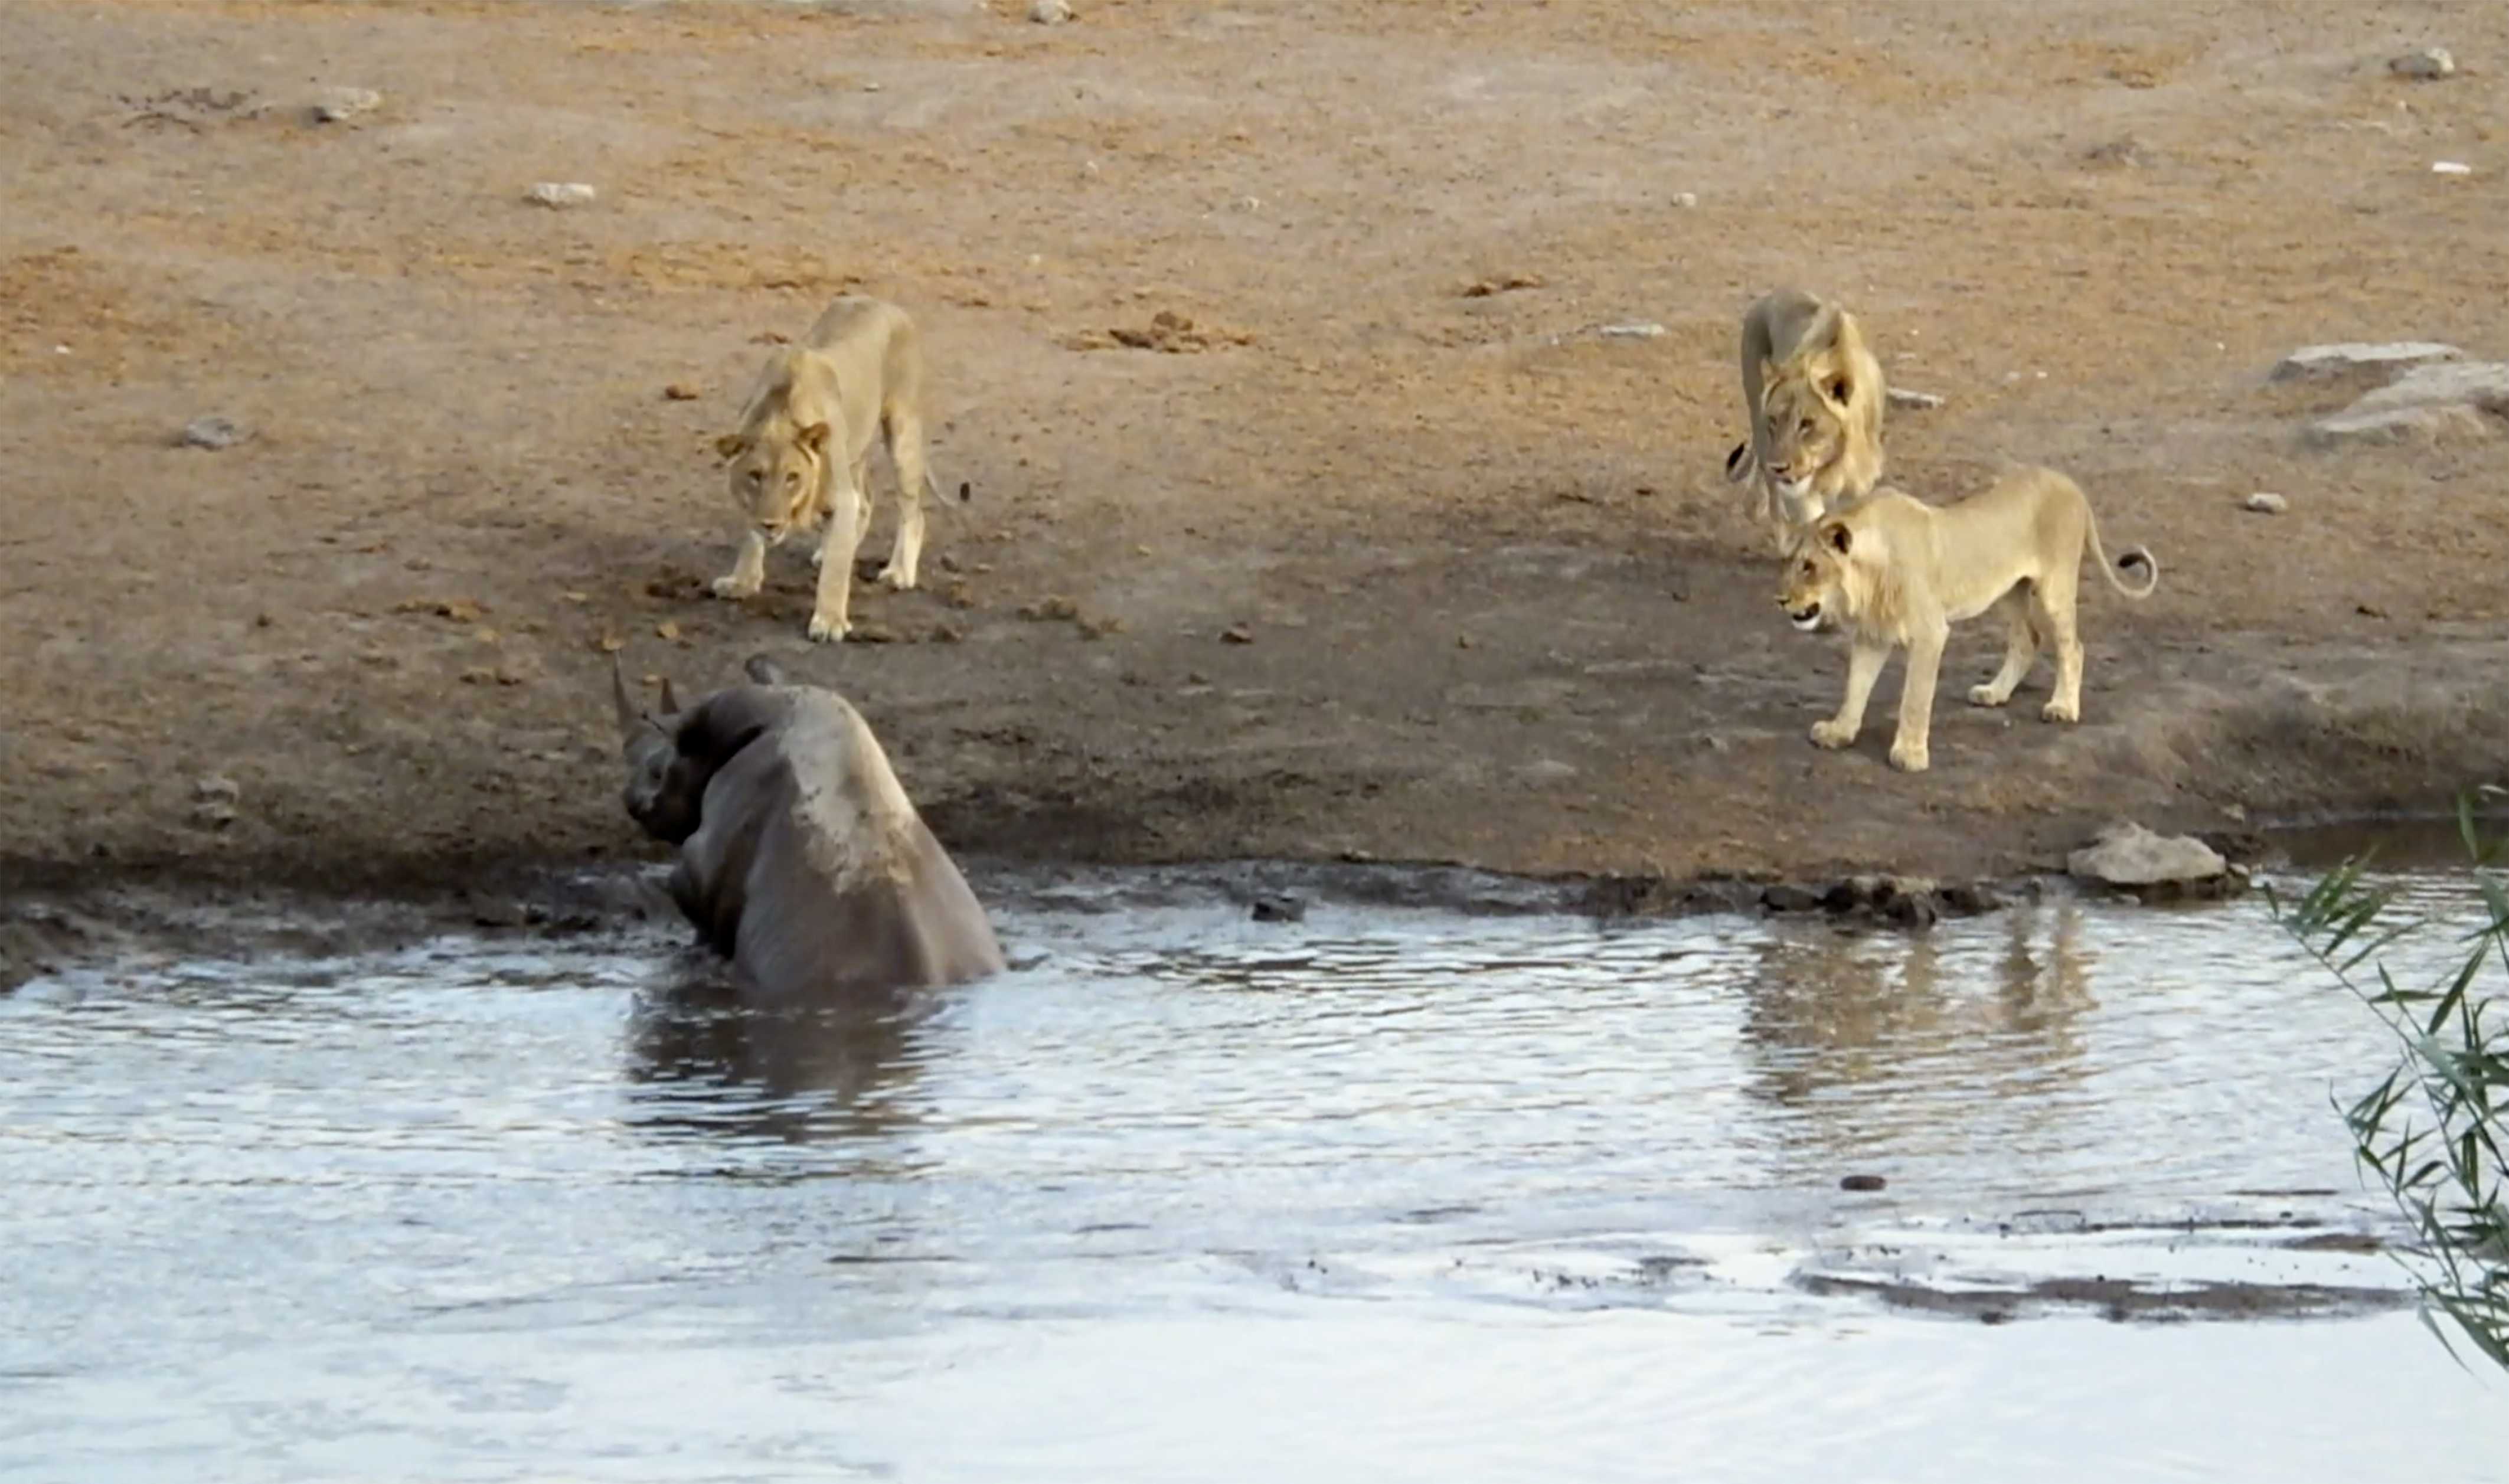 British tourist captures moment rhino almost gets eaten by lions ...